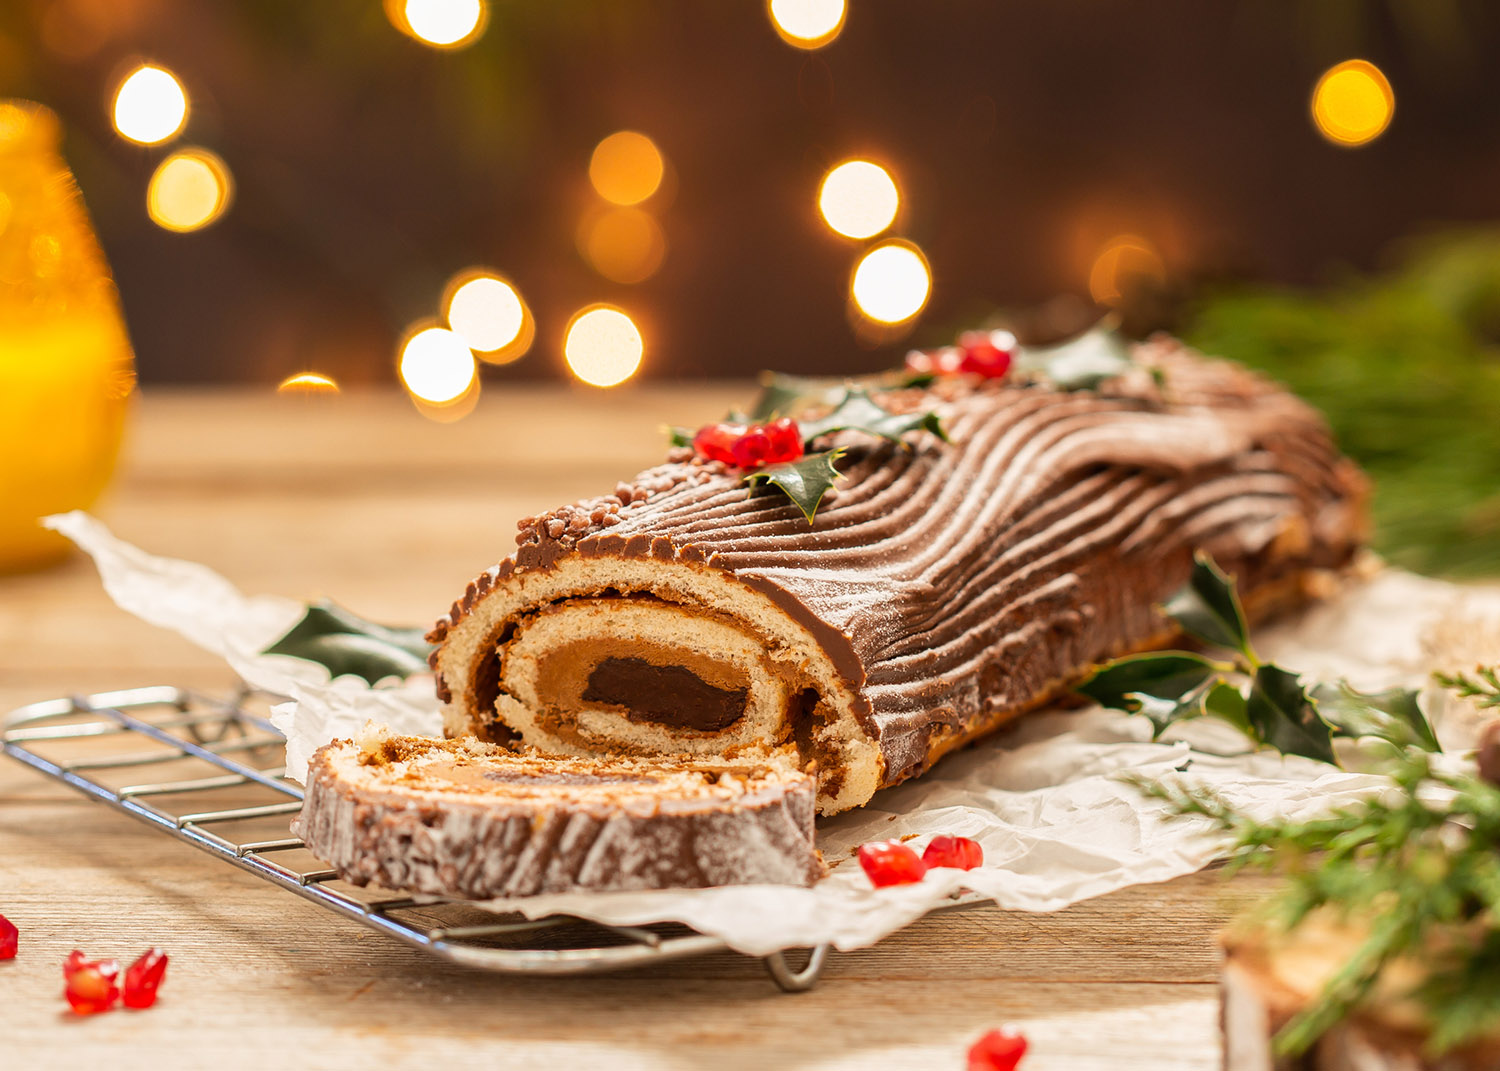 Traditional Christmas cake, chocolate Yule log on a rustic table with festive holiday decorations and lights